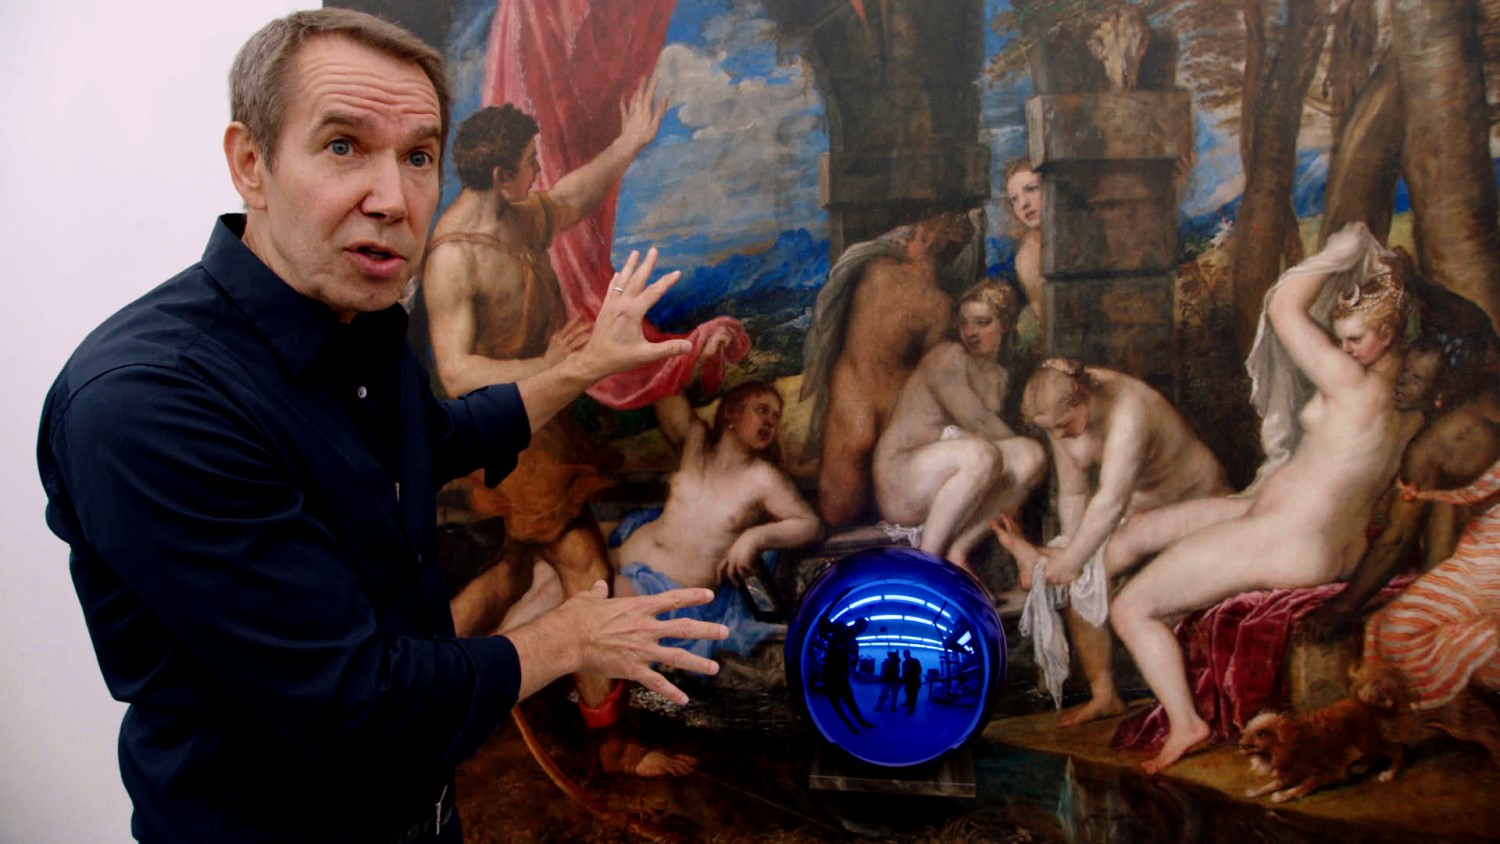 Jeff Koons, whose work rocketed in price from $950,000 to 65 million. The Price of Everything, Image copyright: Dogwoof